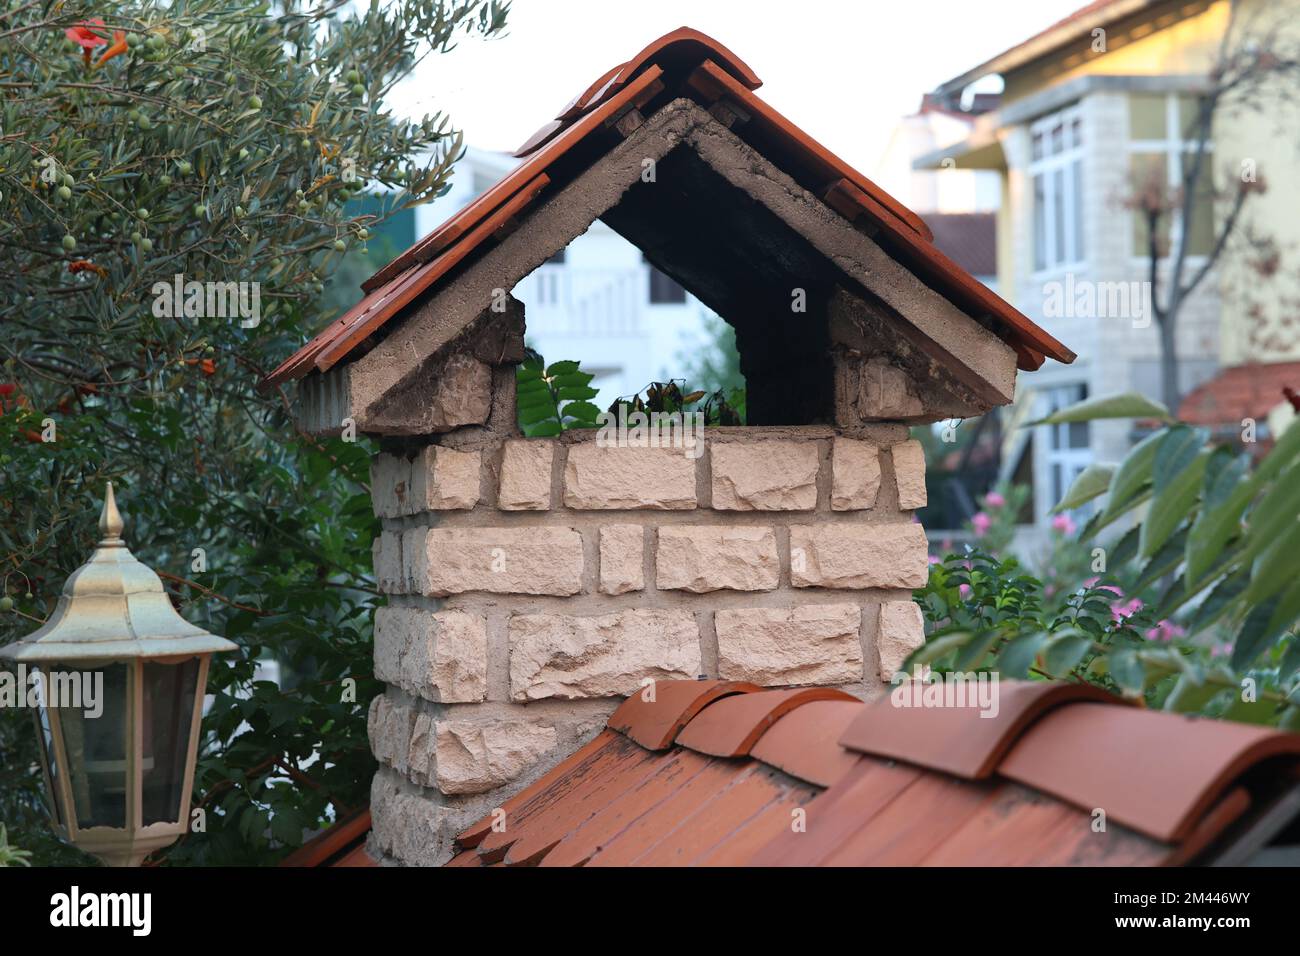 A beautiful closeup view of a stoned chimney oven for grilling in Croatia Stock Photo